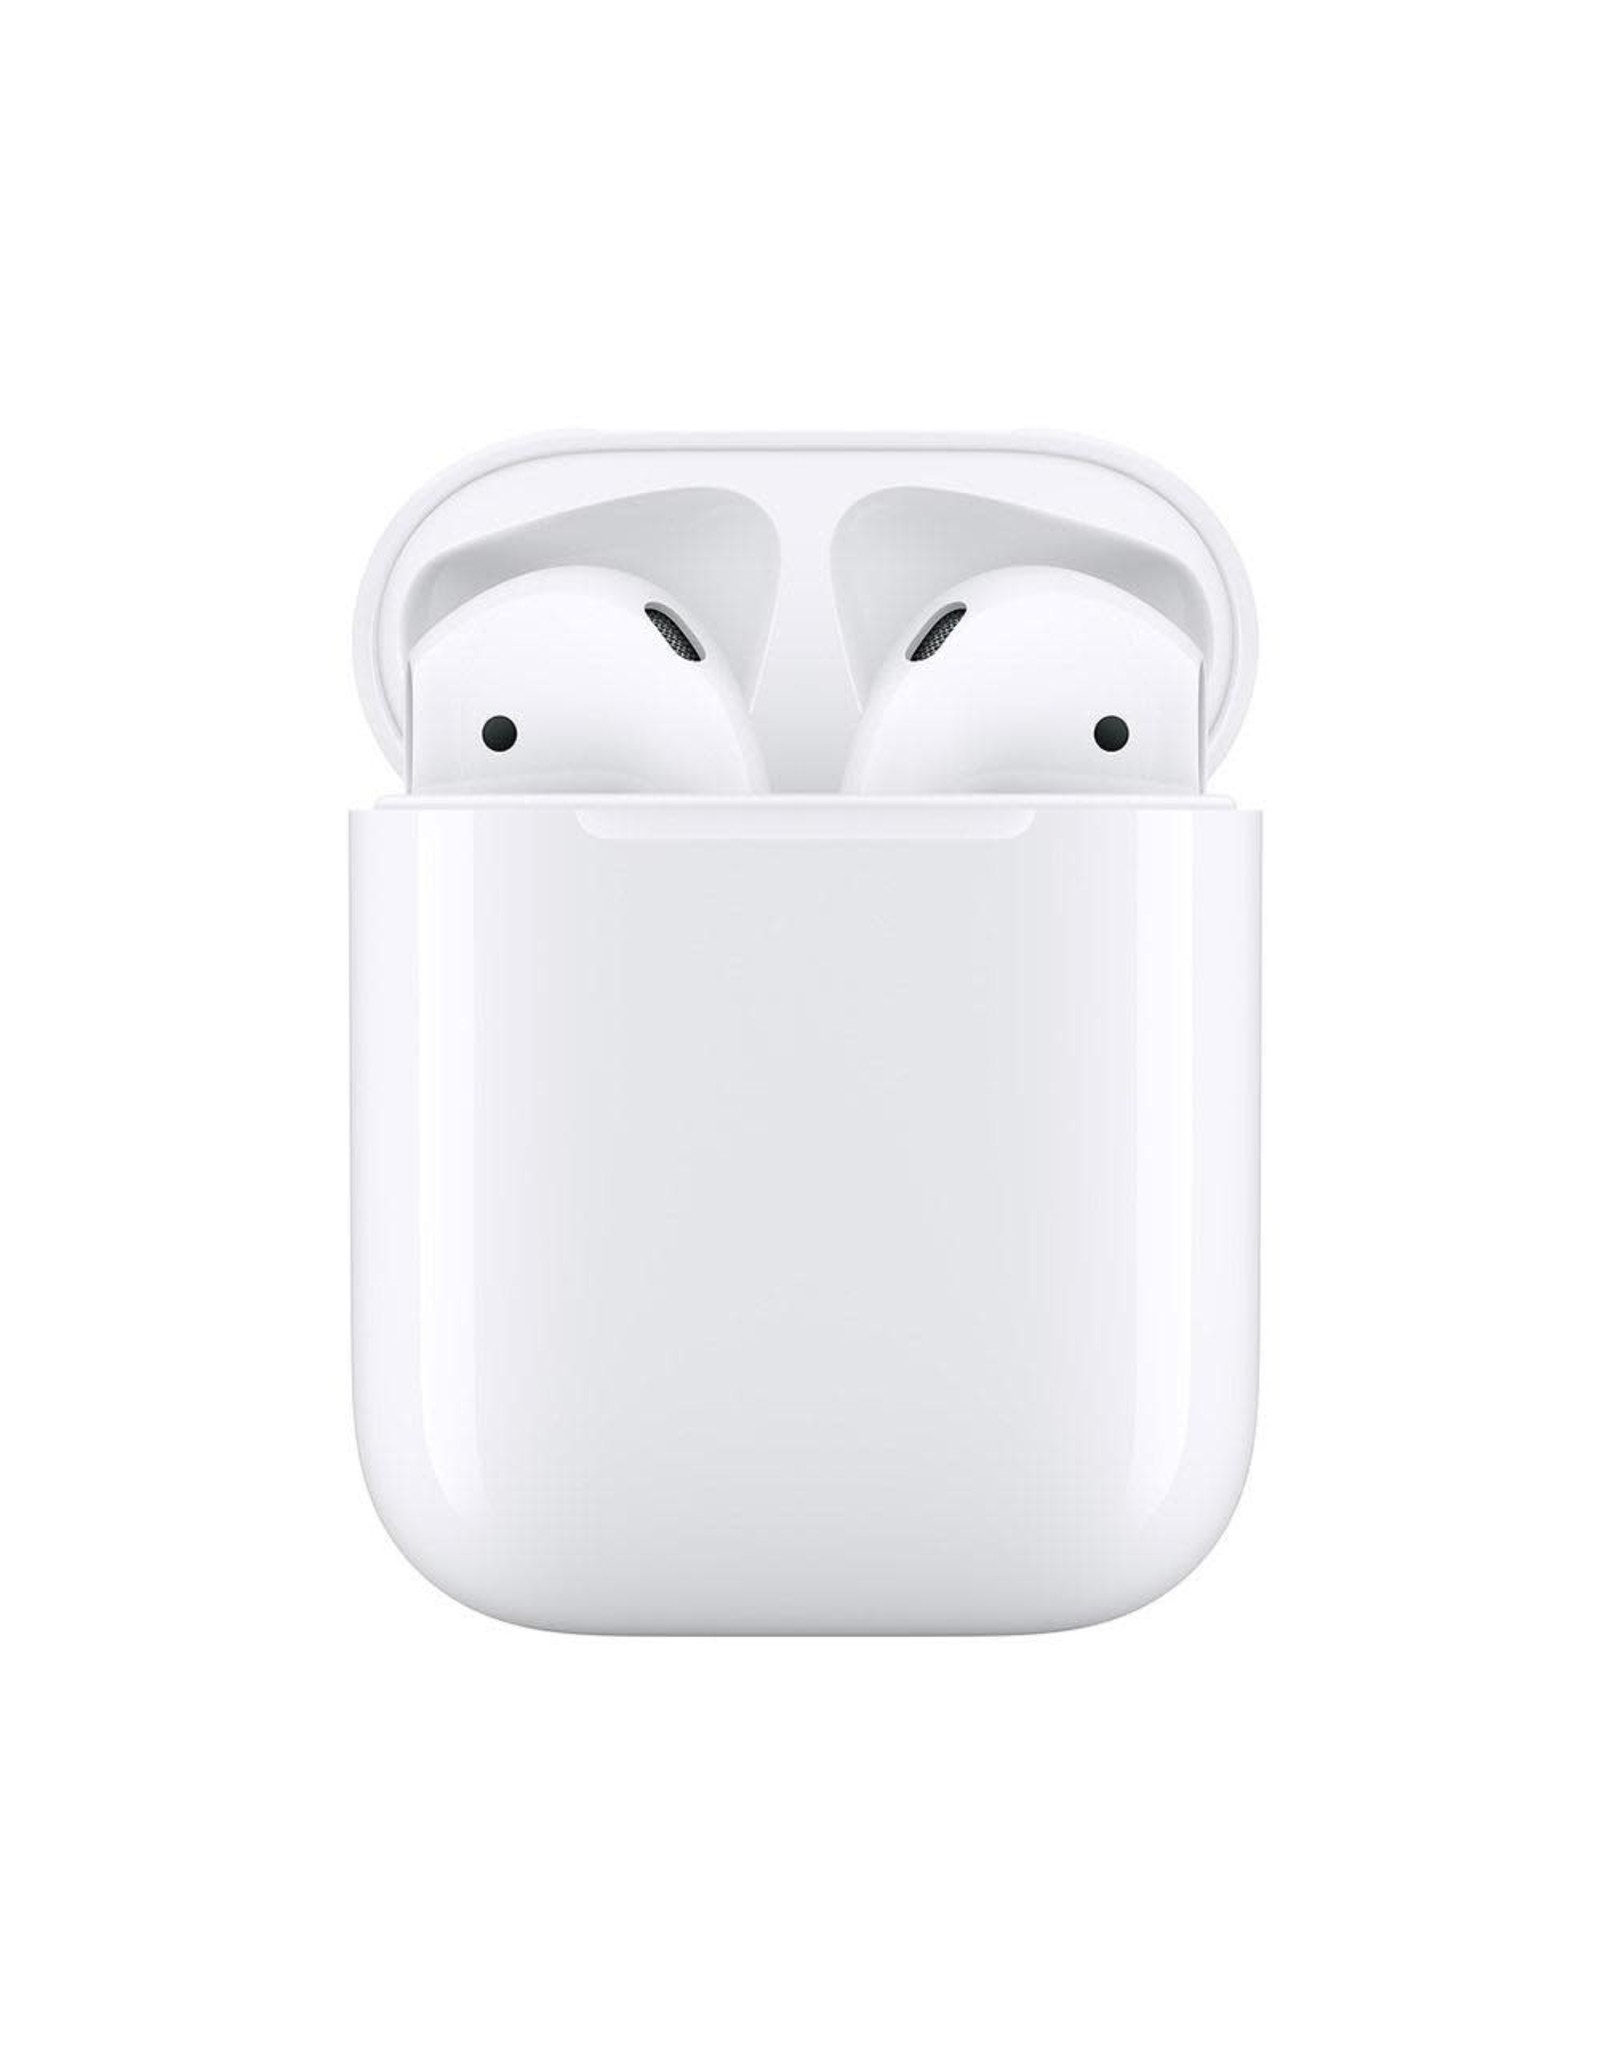 Apple Apple AirPods (2nd generation) with Charging Case